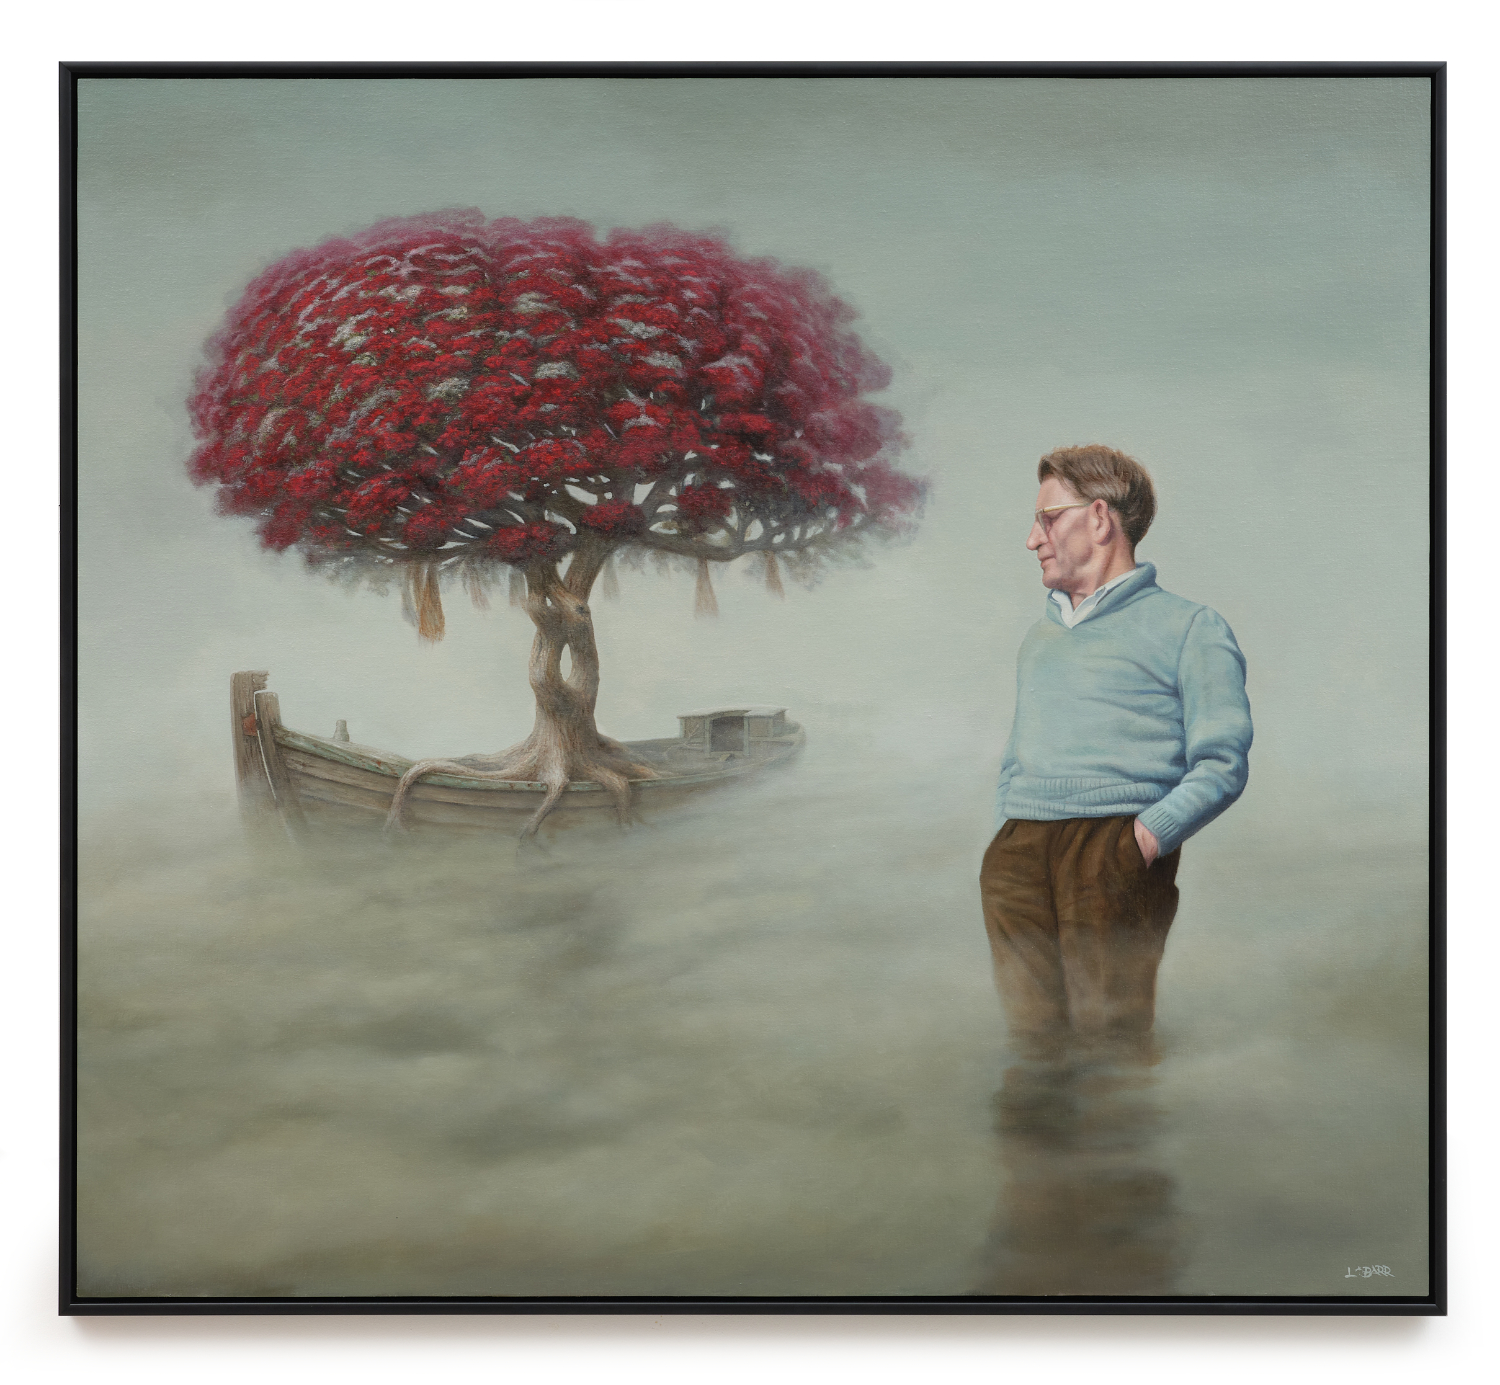  Painting of a man standing in the water with boat drifting by.